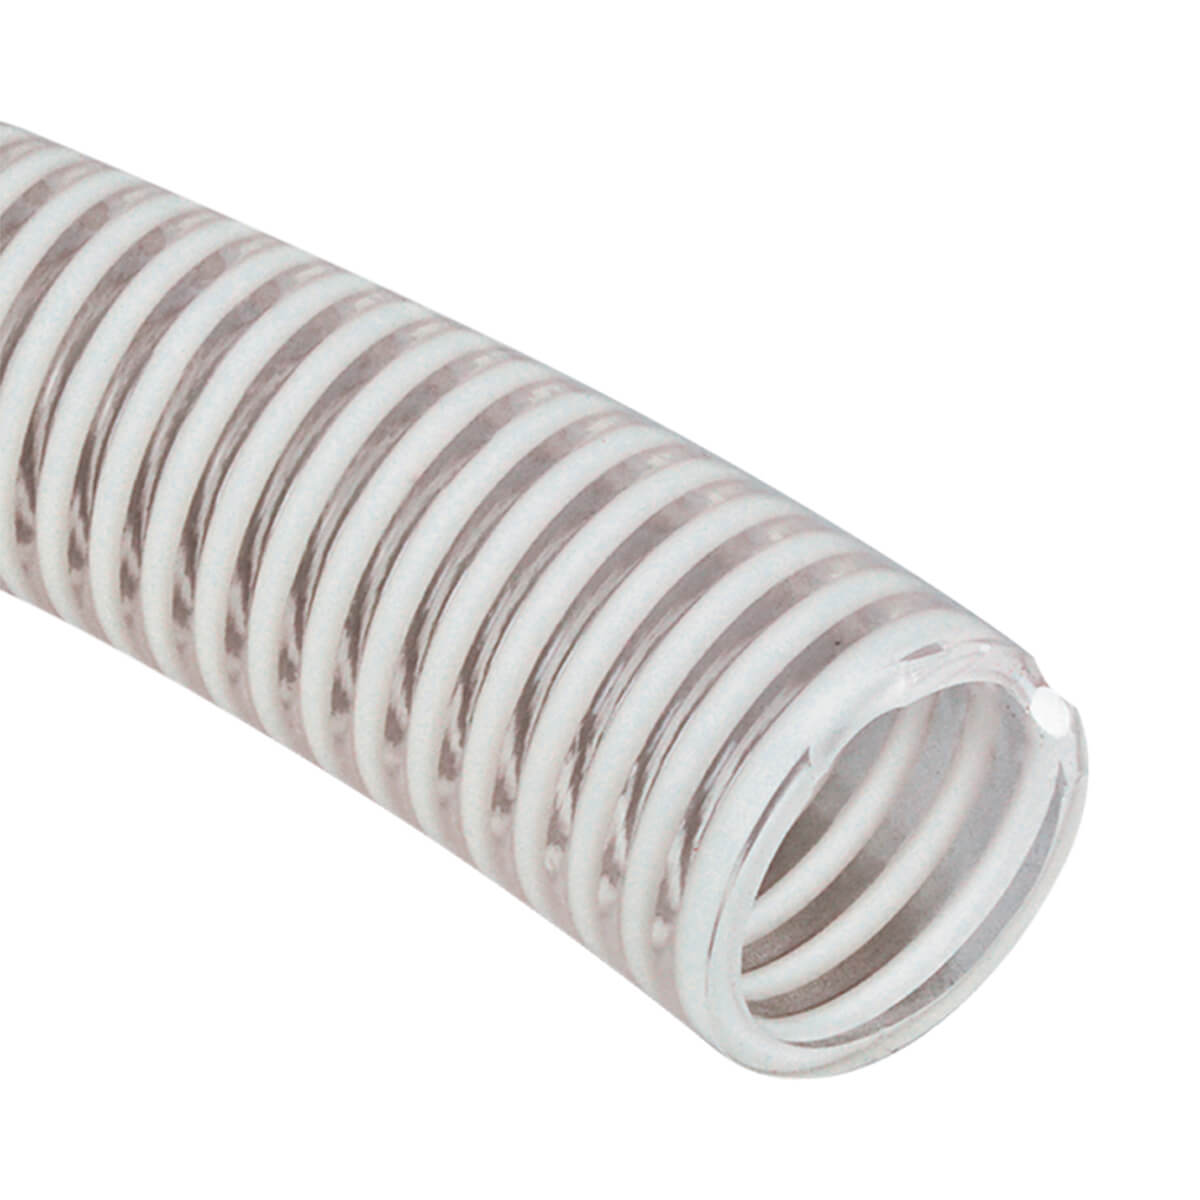 Clear PVC Suction Hose — Bulk/Uncoupled - 1-1/2-in - Price Per ft